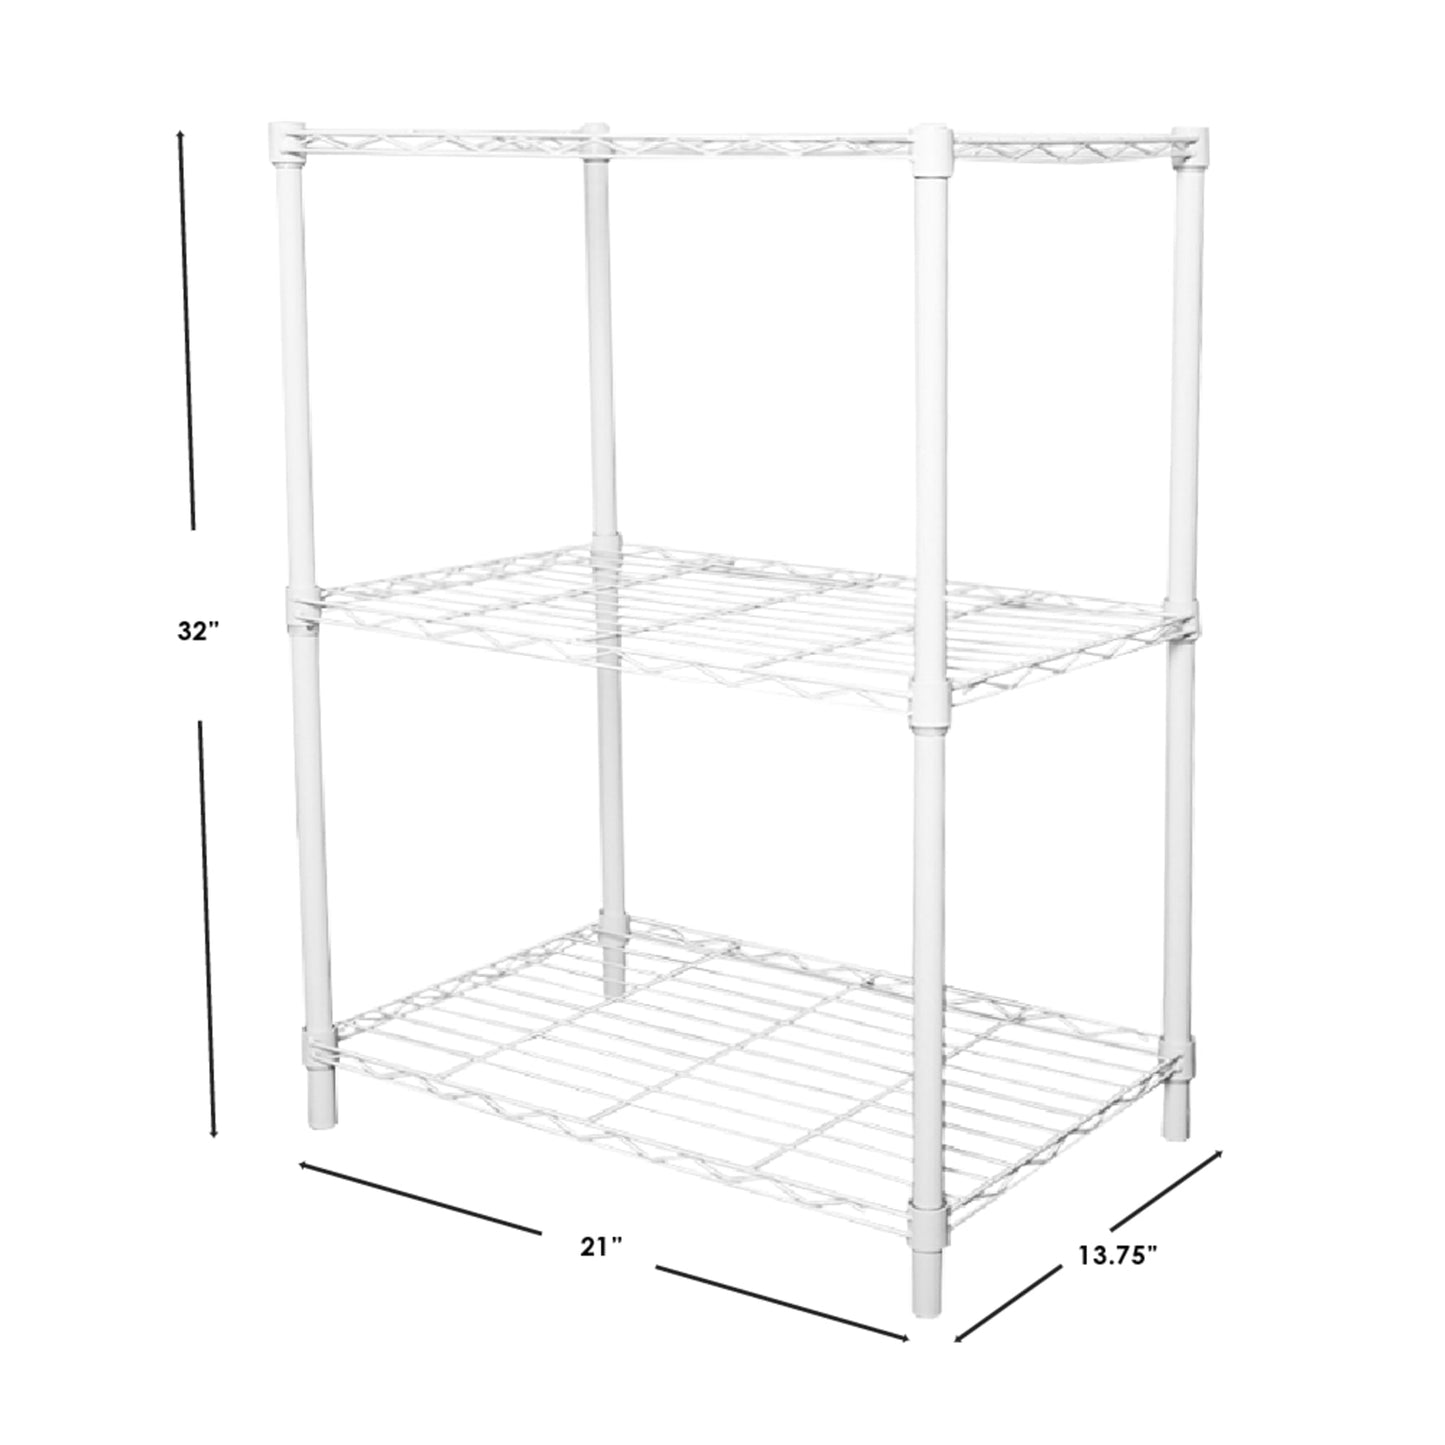 3 Tier Steel Multi-Purpose Adjustable Wire Shelving Unit with 50 lb Weight Capacity Per Shelf, White